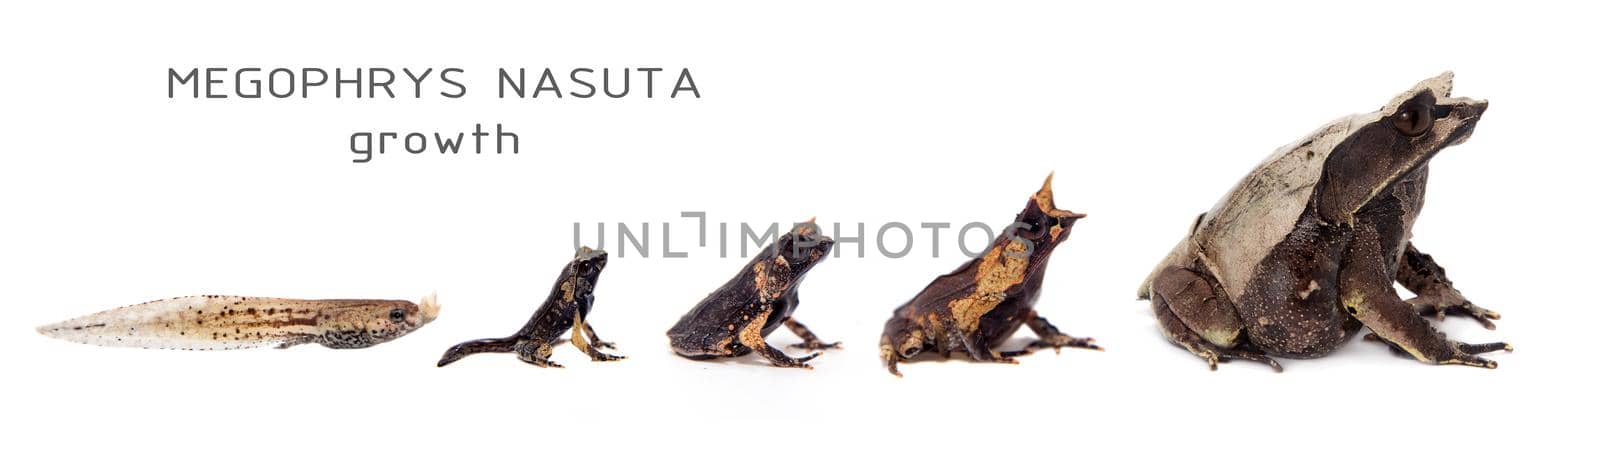 The long-nosed horned frog growth on white by RosaJay